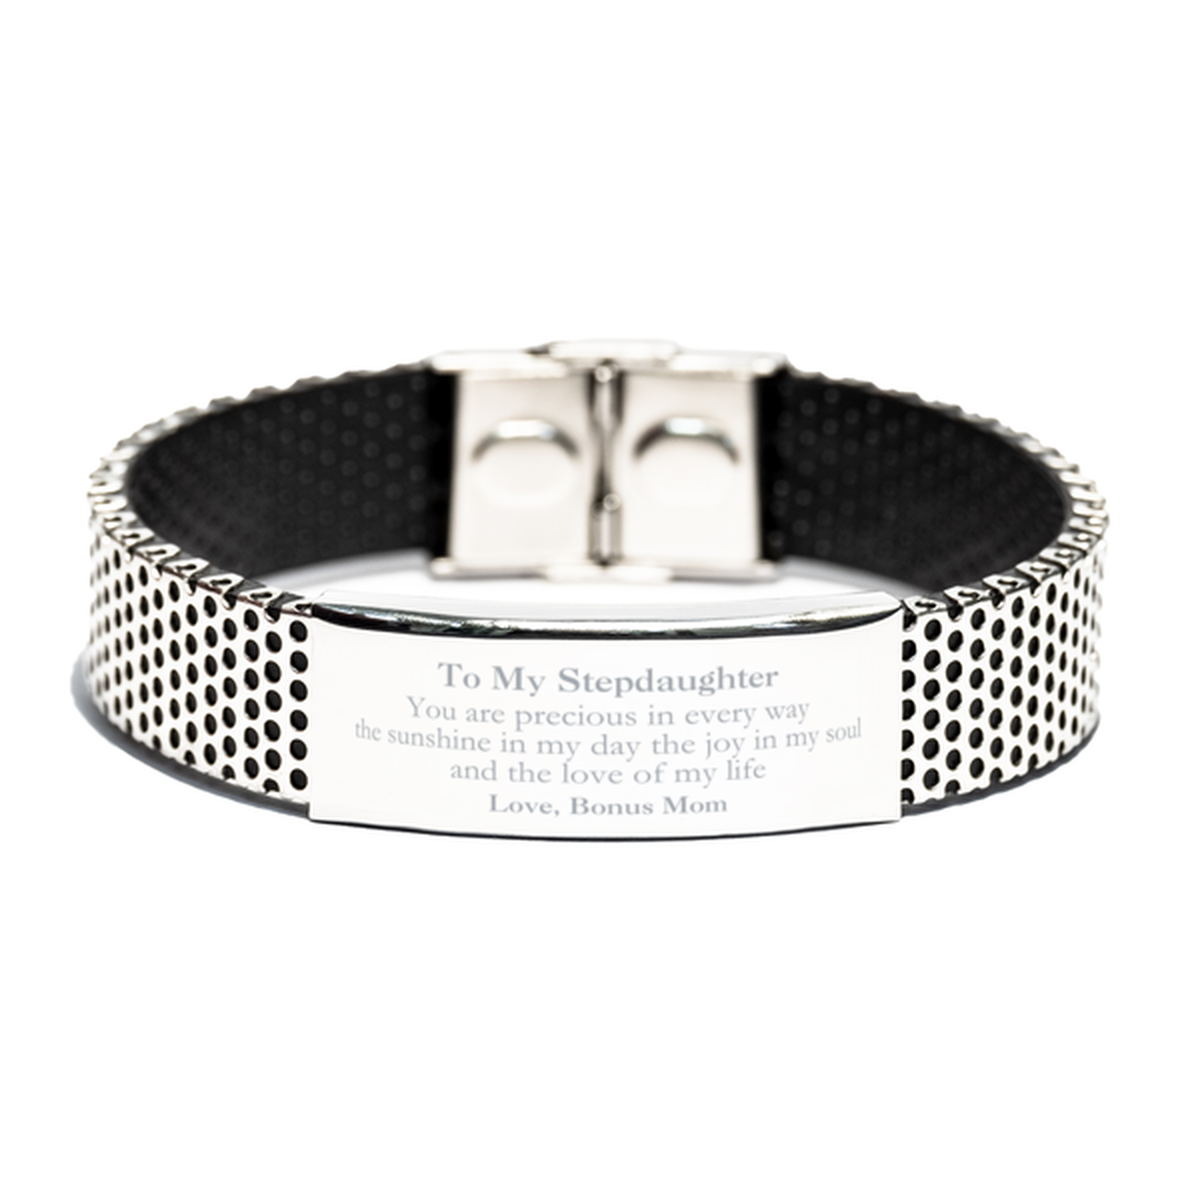 Graduation Gifts for Stepdaughter Stainless Steel Bracelet Present from Bonus Mom, Christmas Stepdaughter Birthday Gifts Stepdaughter You are precious in every way the sunshine in my day. Love, Bonus Mom